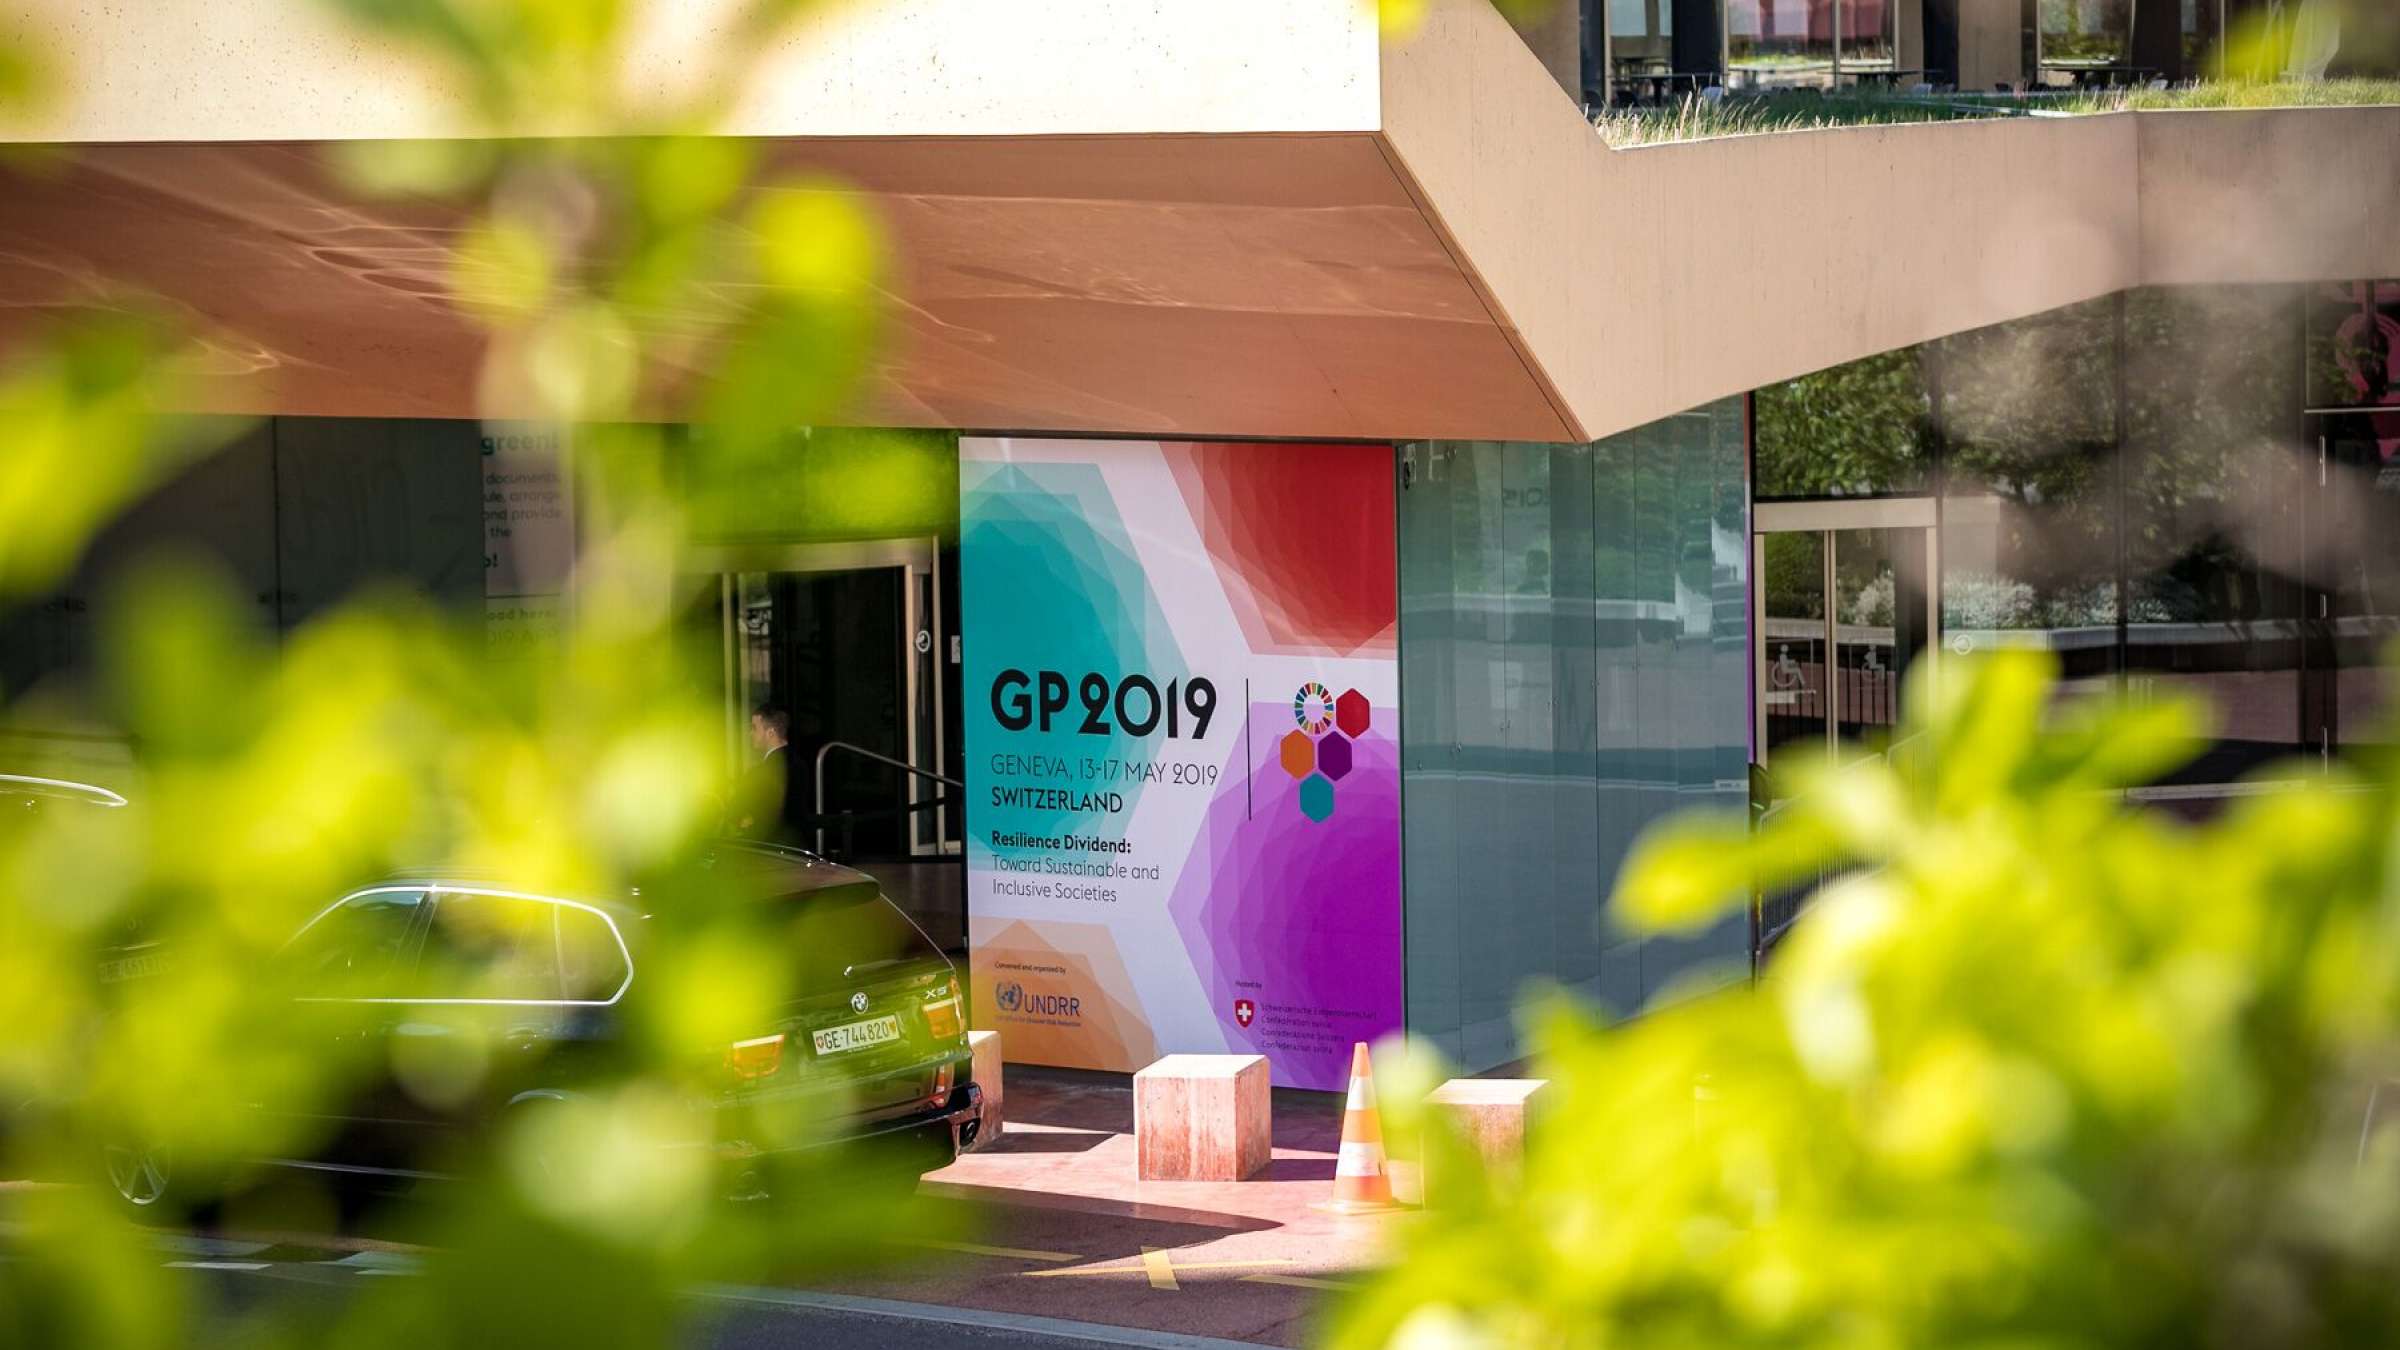  Colorful banner with GP2019 dates and logos placed outside the conference venue